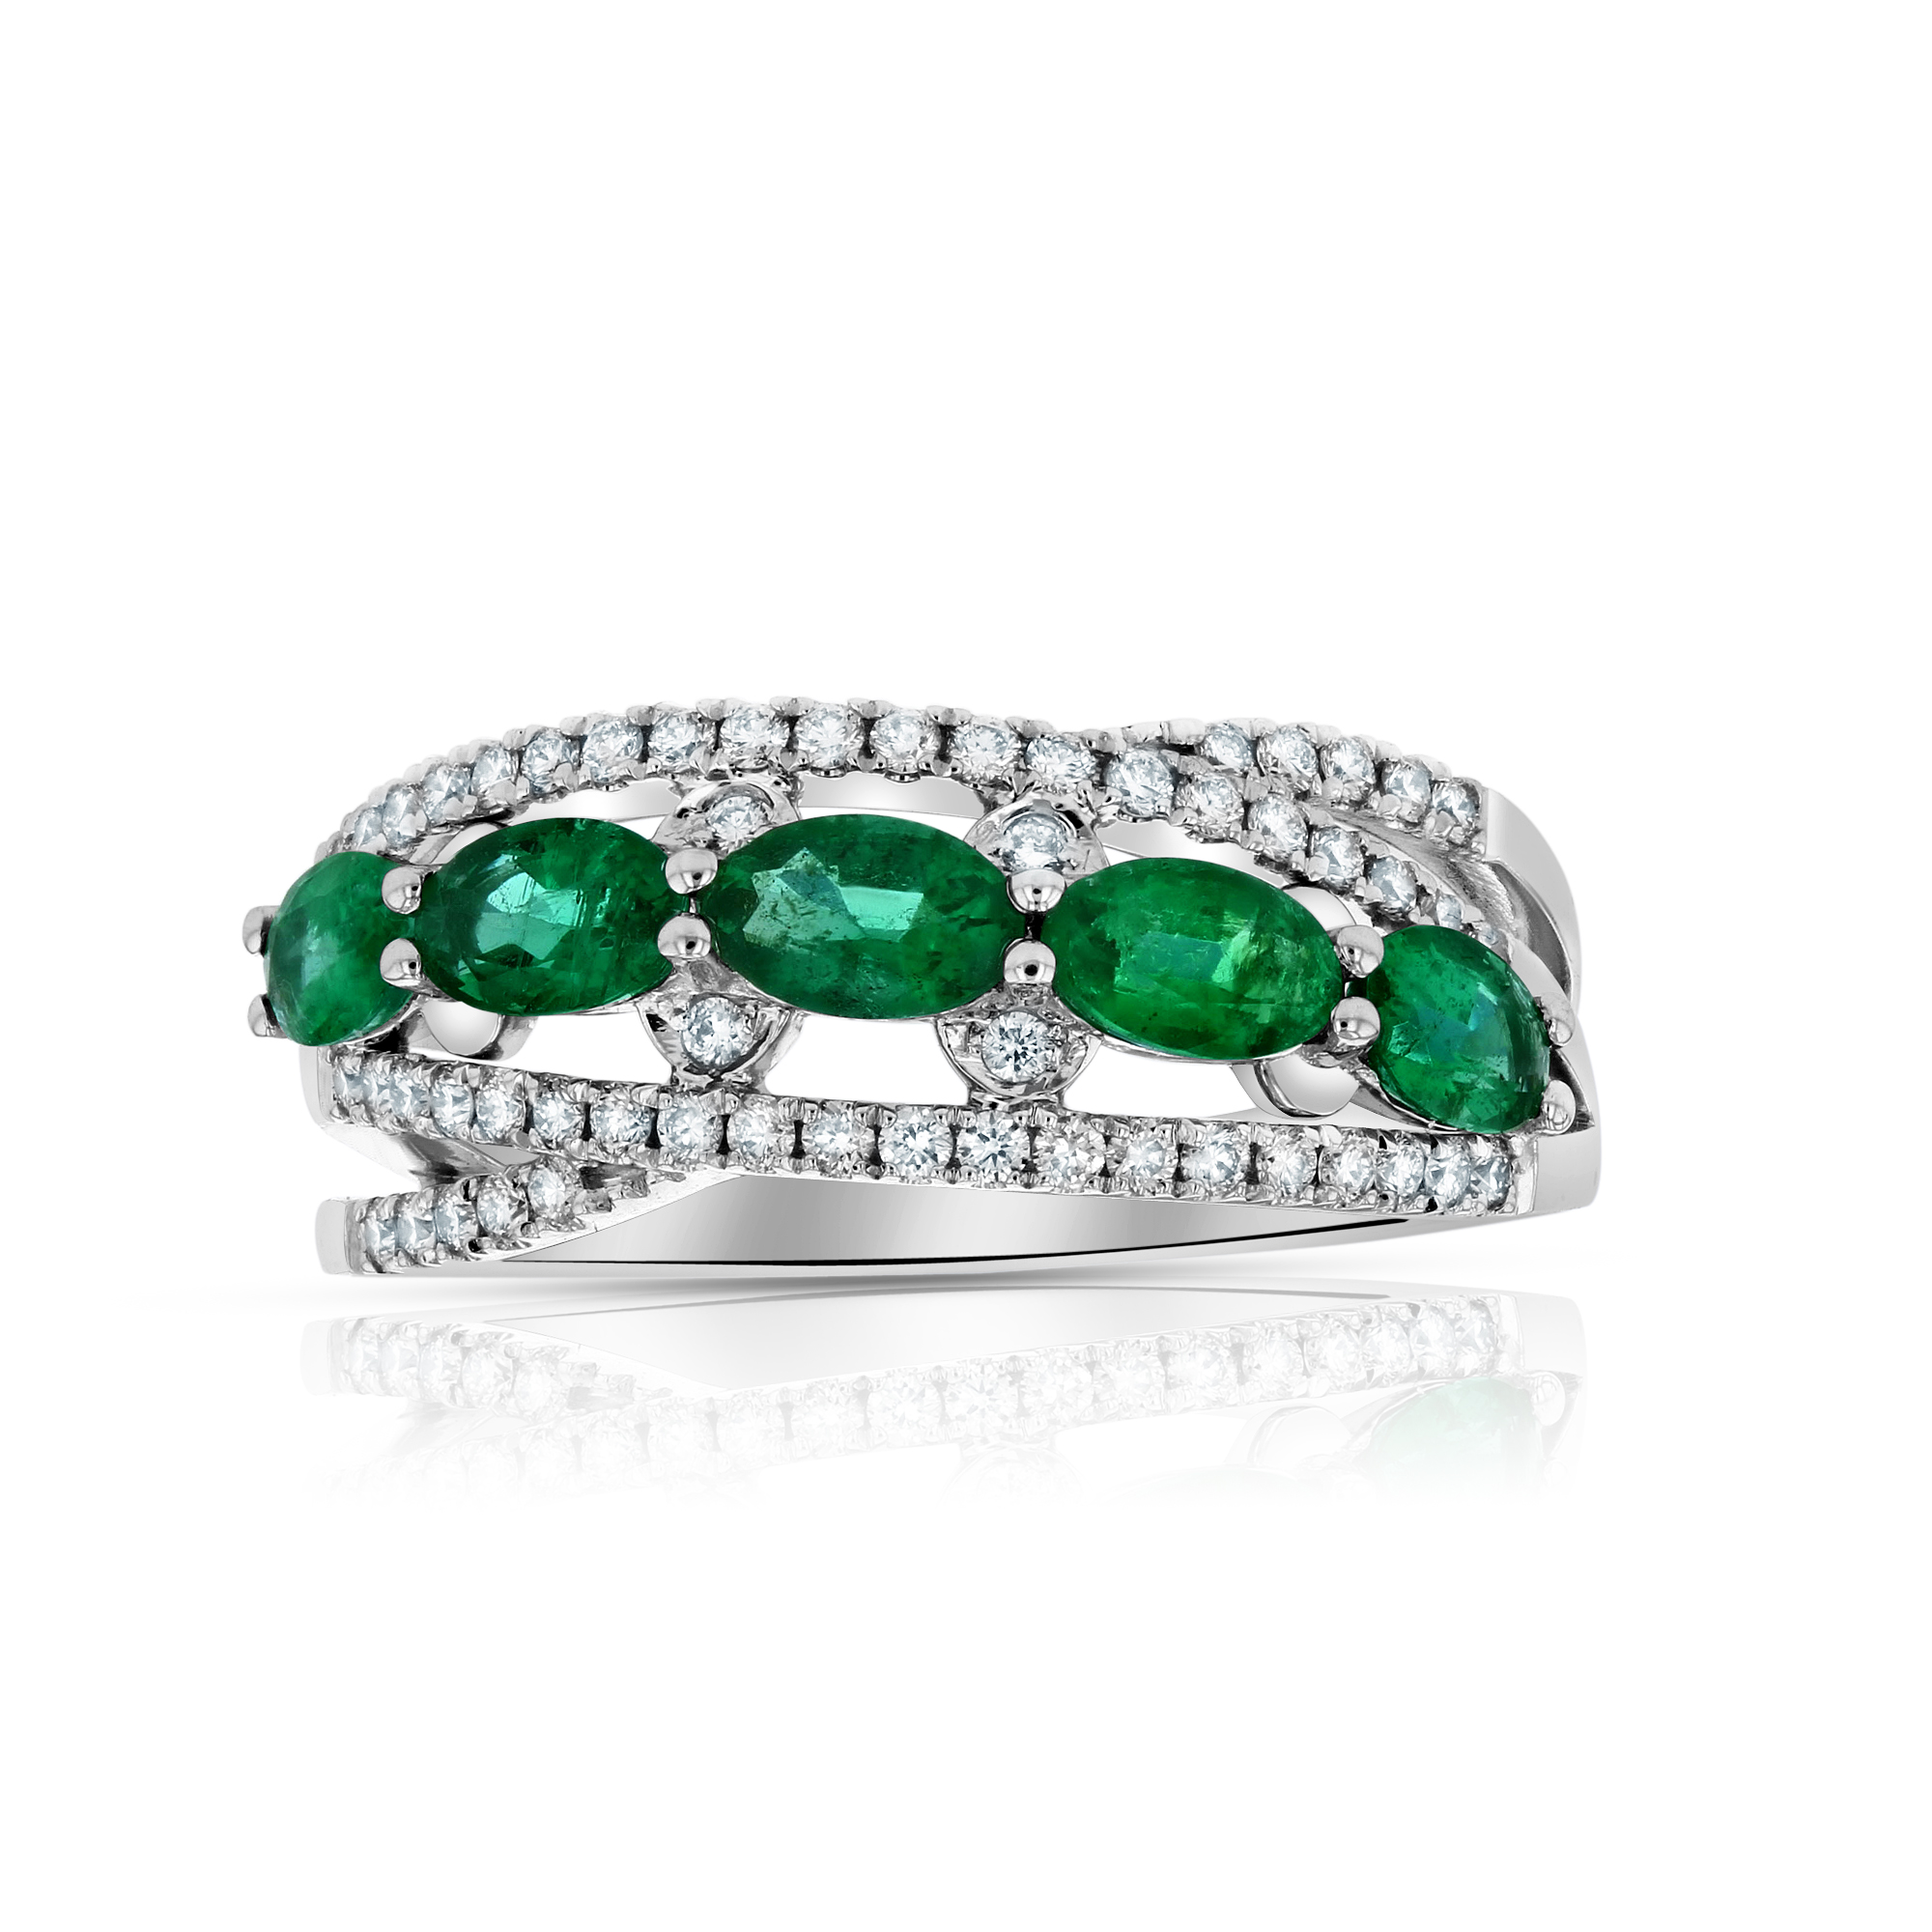 View 1.31ctw Diamond and Emerald Ring in 14k White Gold